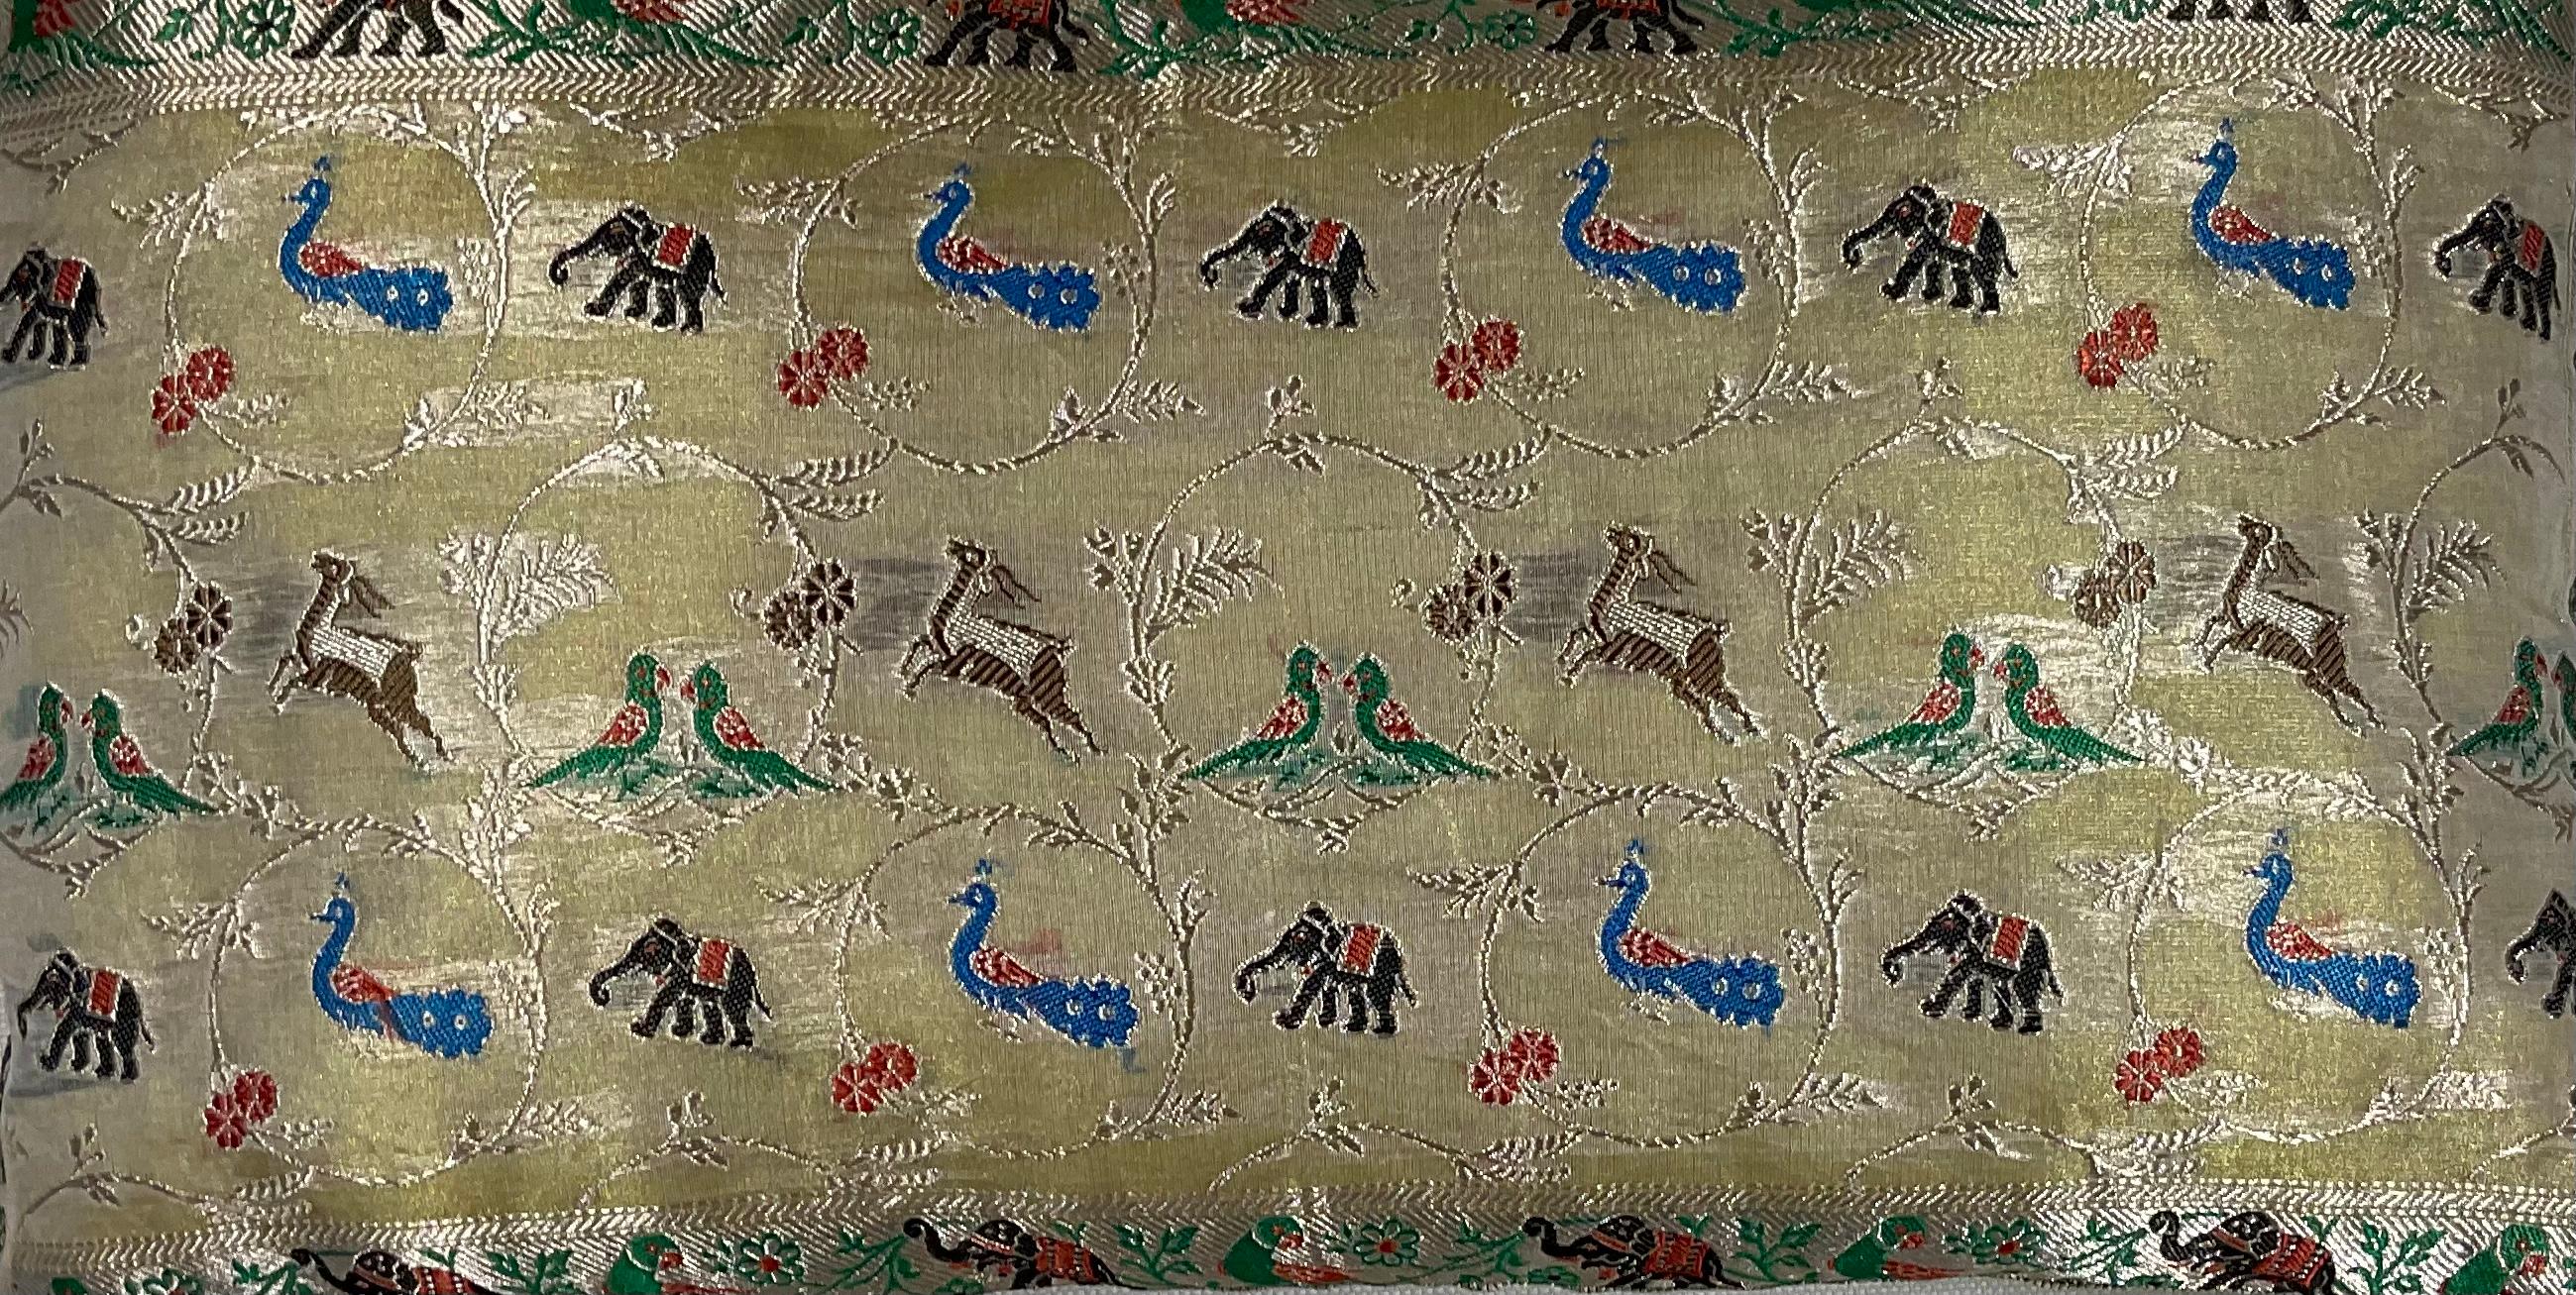 Beautiful pillow made of silk embroidery on metallic thread, with exceptional motifs of animals ,Elephant ,deer , peacock and parrots on floral background.
Fine backing, fresh quality insert.